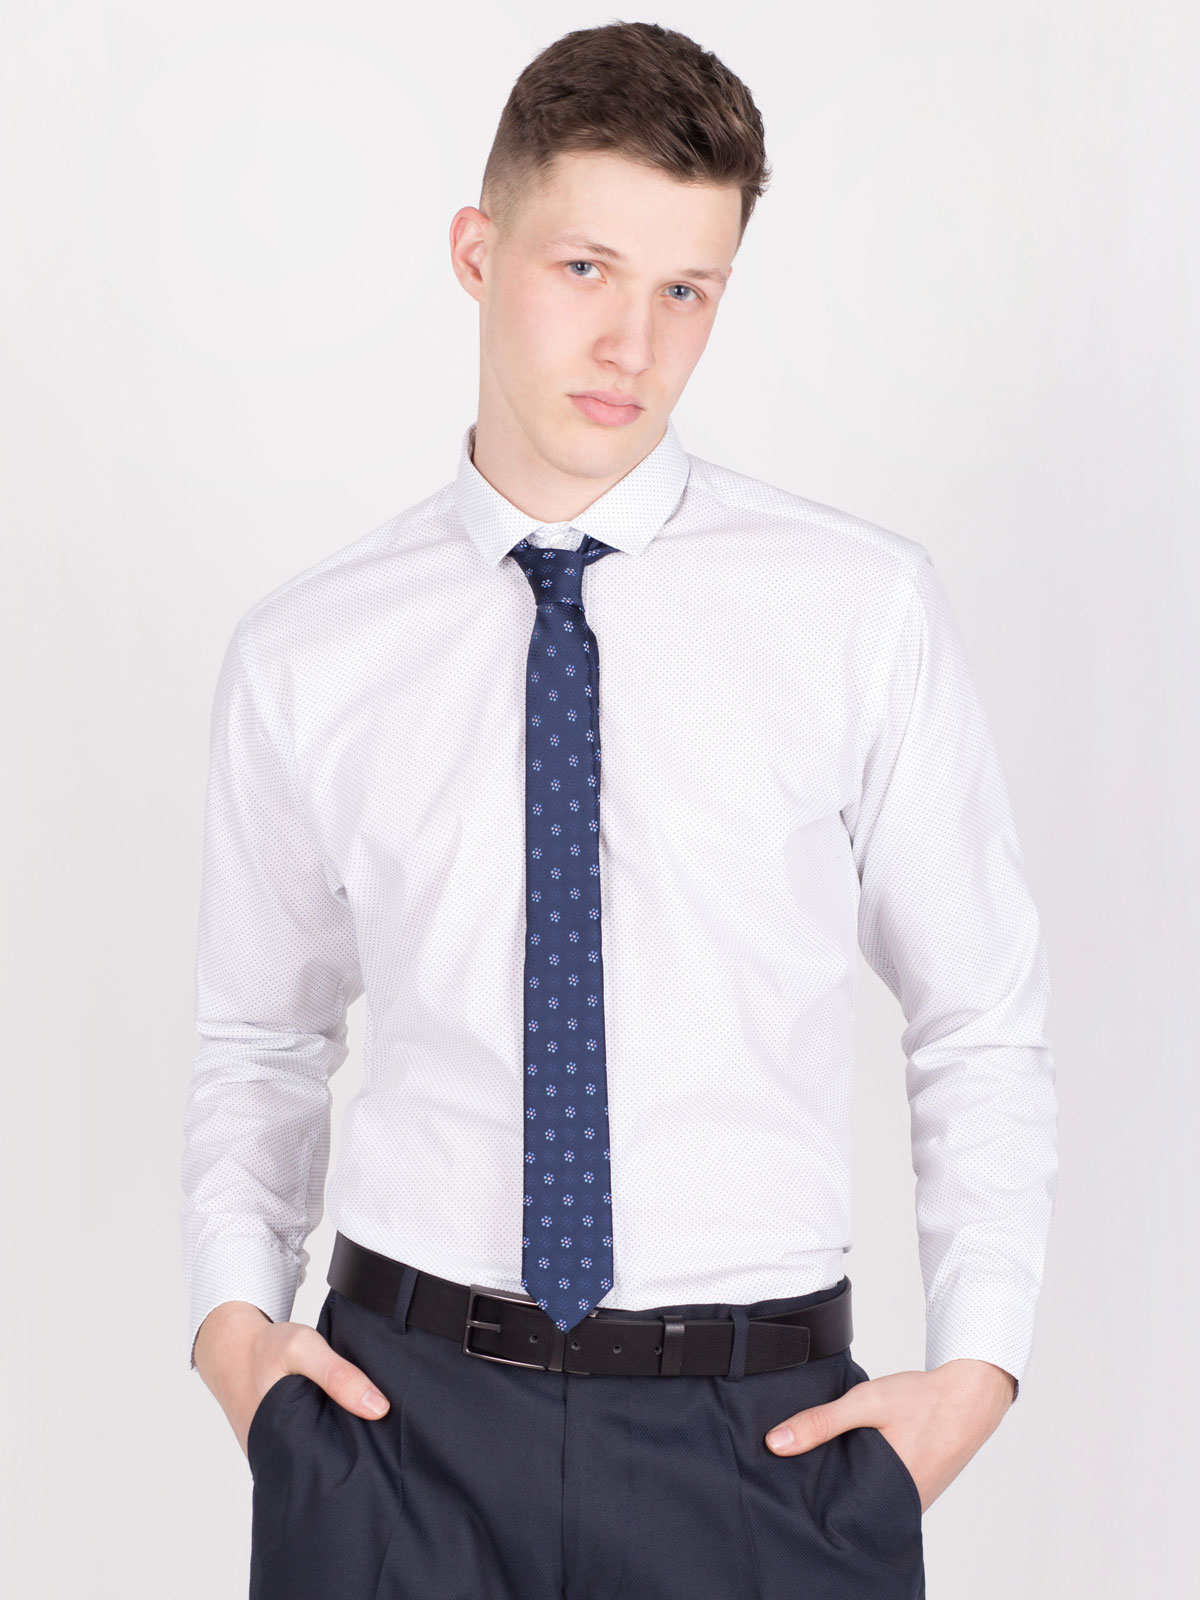 White shirt with black dots - 21460 € 21.93 img4